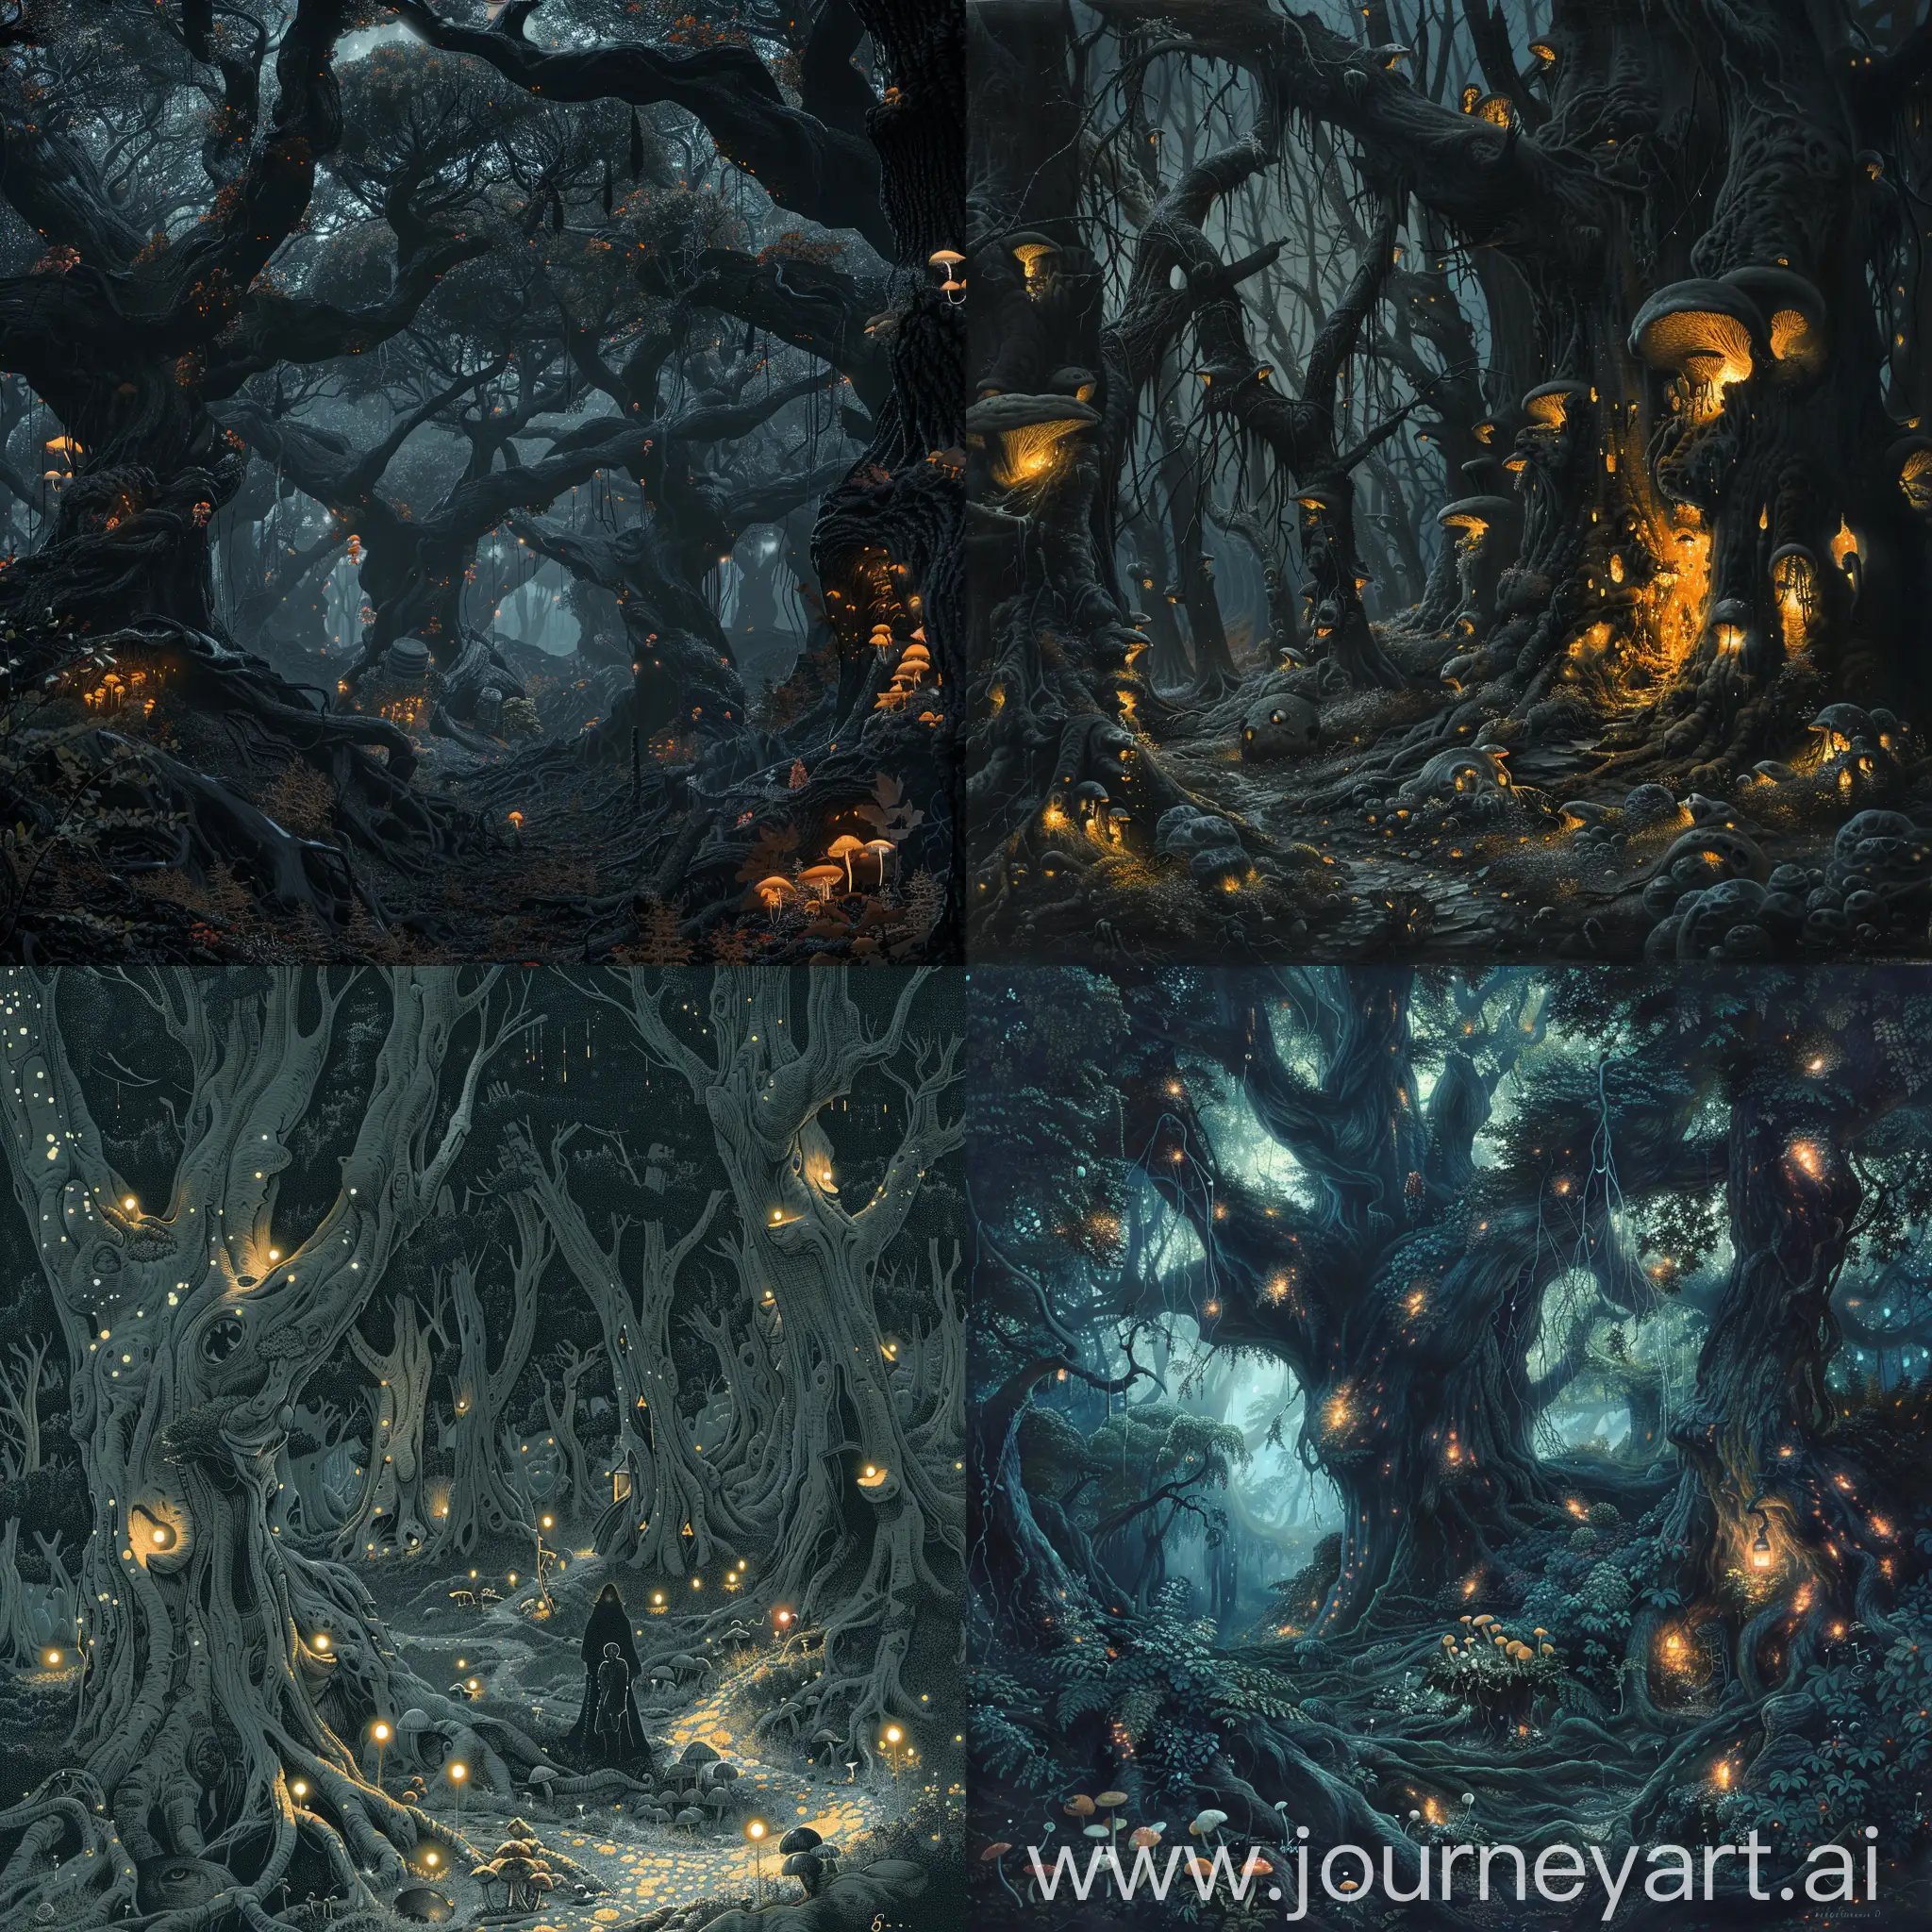 A dark forest filled with ancient trees, with glowing mushrooms and strange creatures, in the style of Gustave Doré.